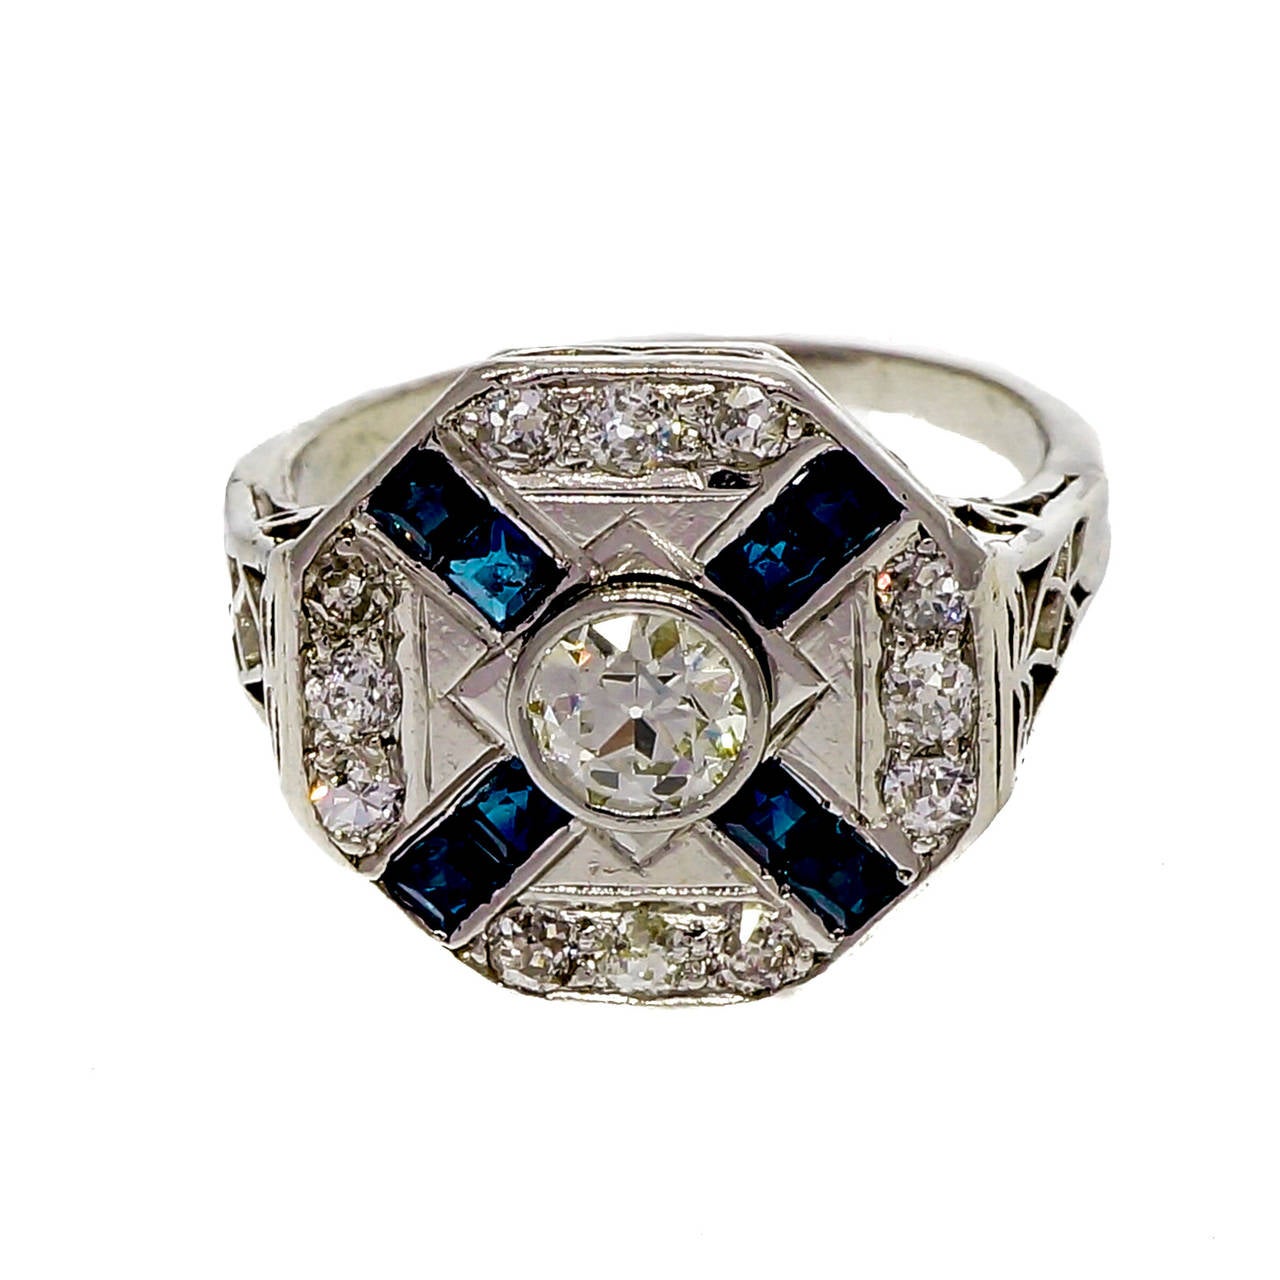 Original Art Deco 1920 octagonal ring with bright blue Sapphires set in an “X” with an original old European cut diamond center. EGL certified. Totally original. All handmade.

1 round old European cut diamond, approx. total weight .37cts, J, VS1,